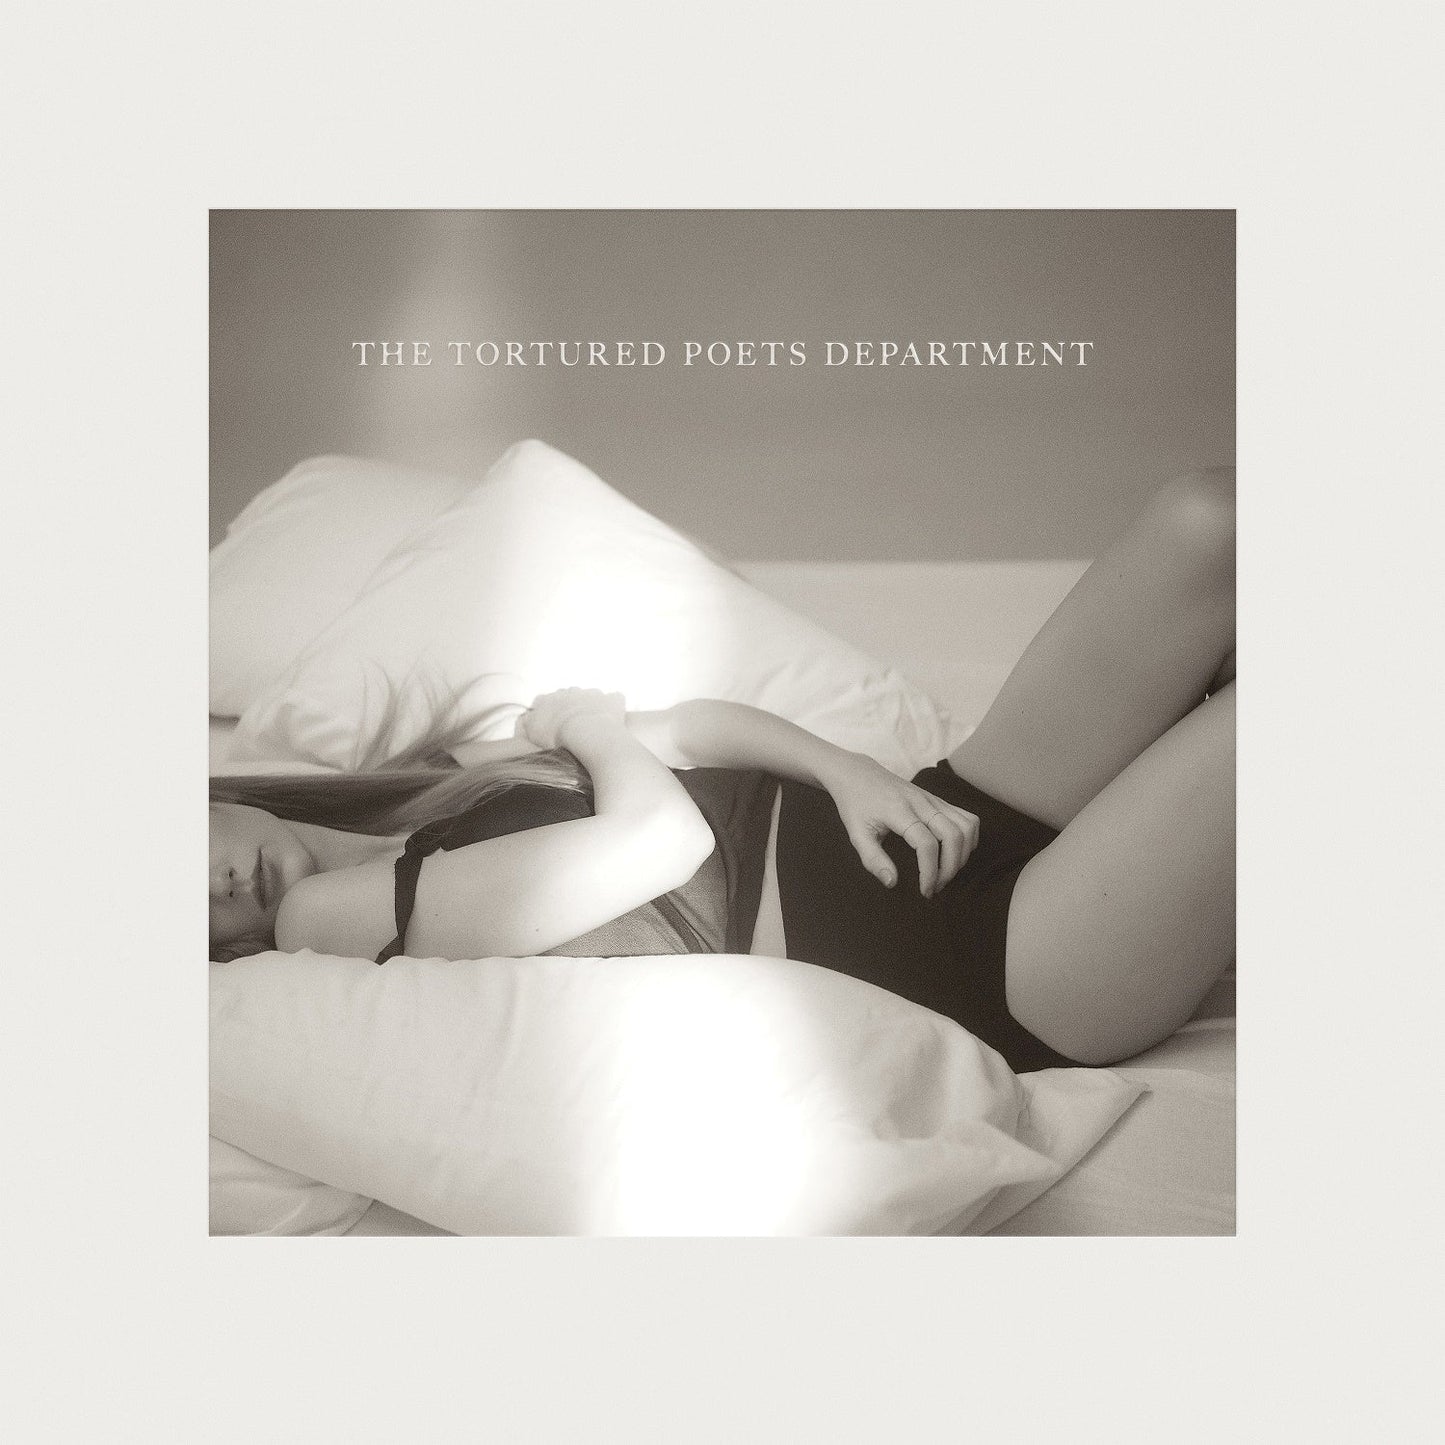 Taylor Swift - The Tortured Poets Department (Limited Edition, Ghosted White Vinyl) (2 LP) - Joco Records